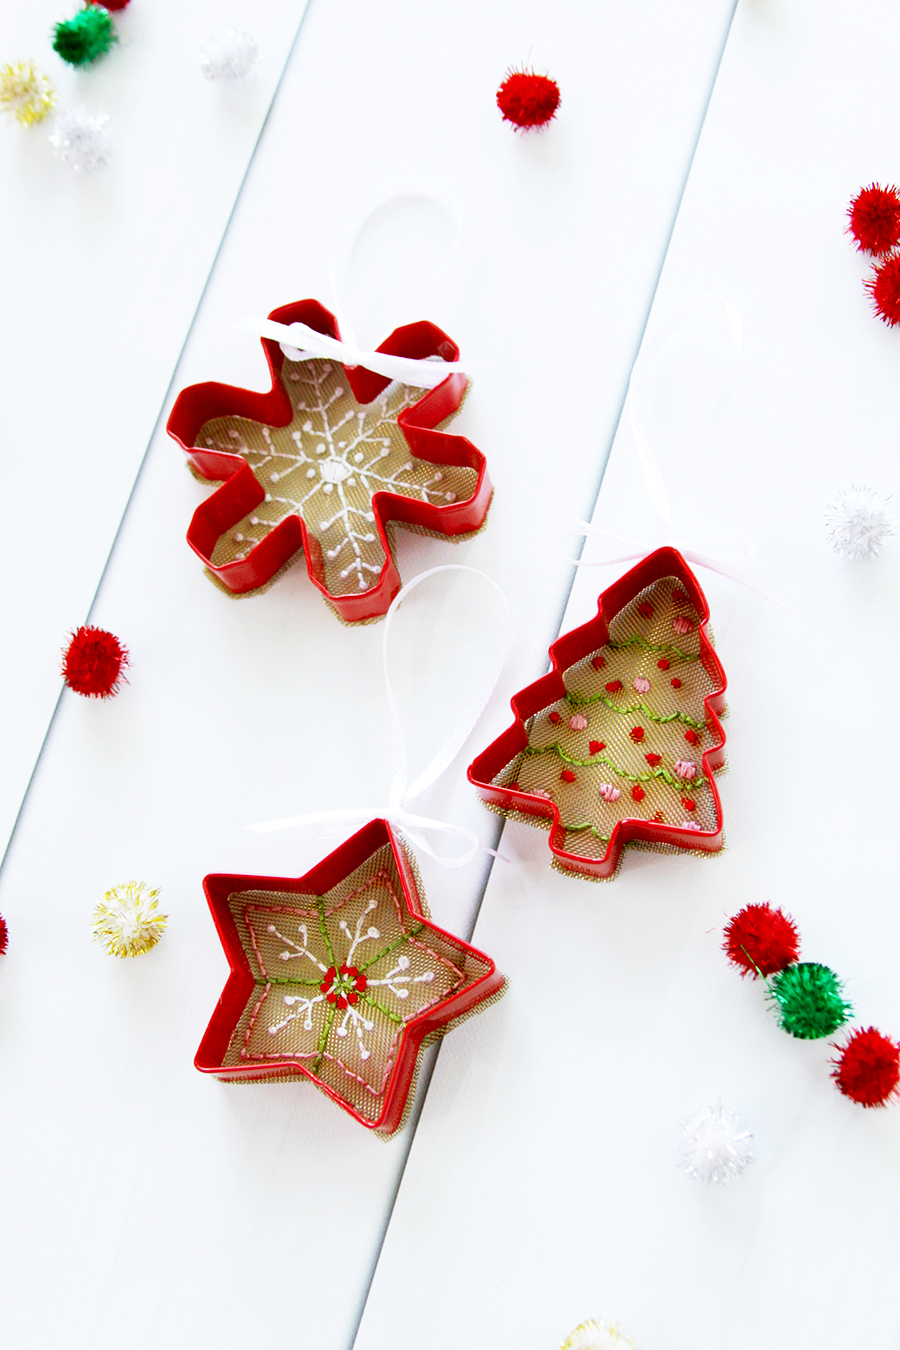 Cookie Cutter and Mesh Ornaments